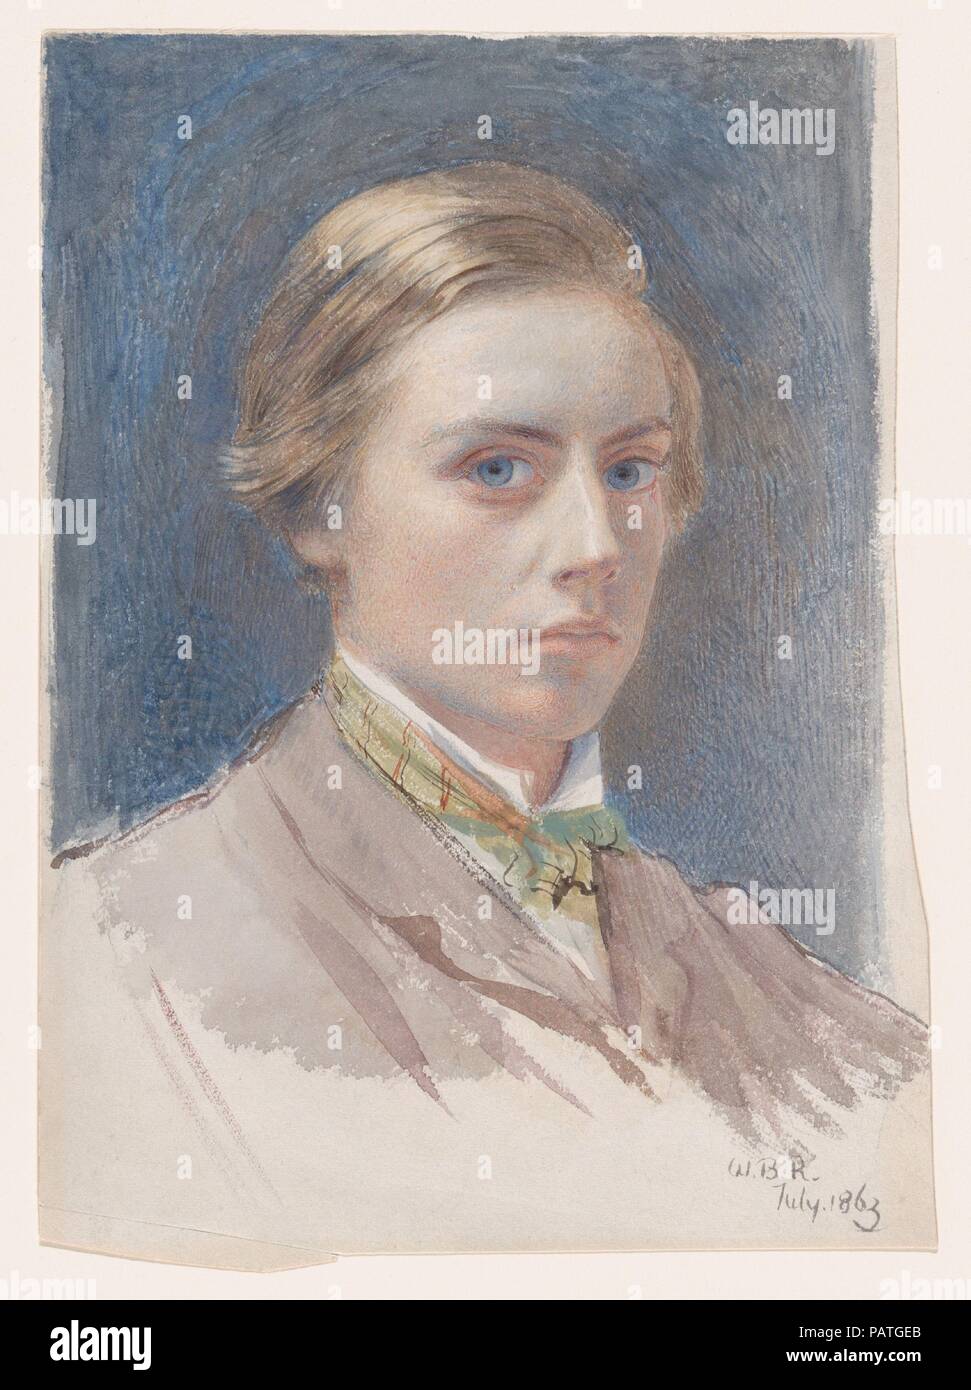 Self-portrait, aged 21. Artist: Sir William Blake Richmond (British, London 1842-1921 London). Dimensions: Sheet: 9 × 6 in. (22.9 × 15.2 cm). Date: 1863.  The subject of this intense image was named for William Blake, a poet-painter revered by his artist-father George Richmond. With Samuel Palmer as a godfather, and drawing lessons from John Ruskin before he entered the Royal Academy Schools in 1858, the youth's career path must have seemed preordained. He based the self-portrait in part on a miniature that his father had painted at twenty-one to present to his bride (National Portrait Gallery Stock Photo